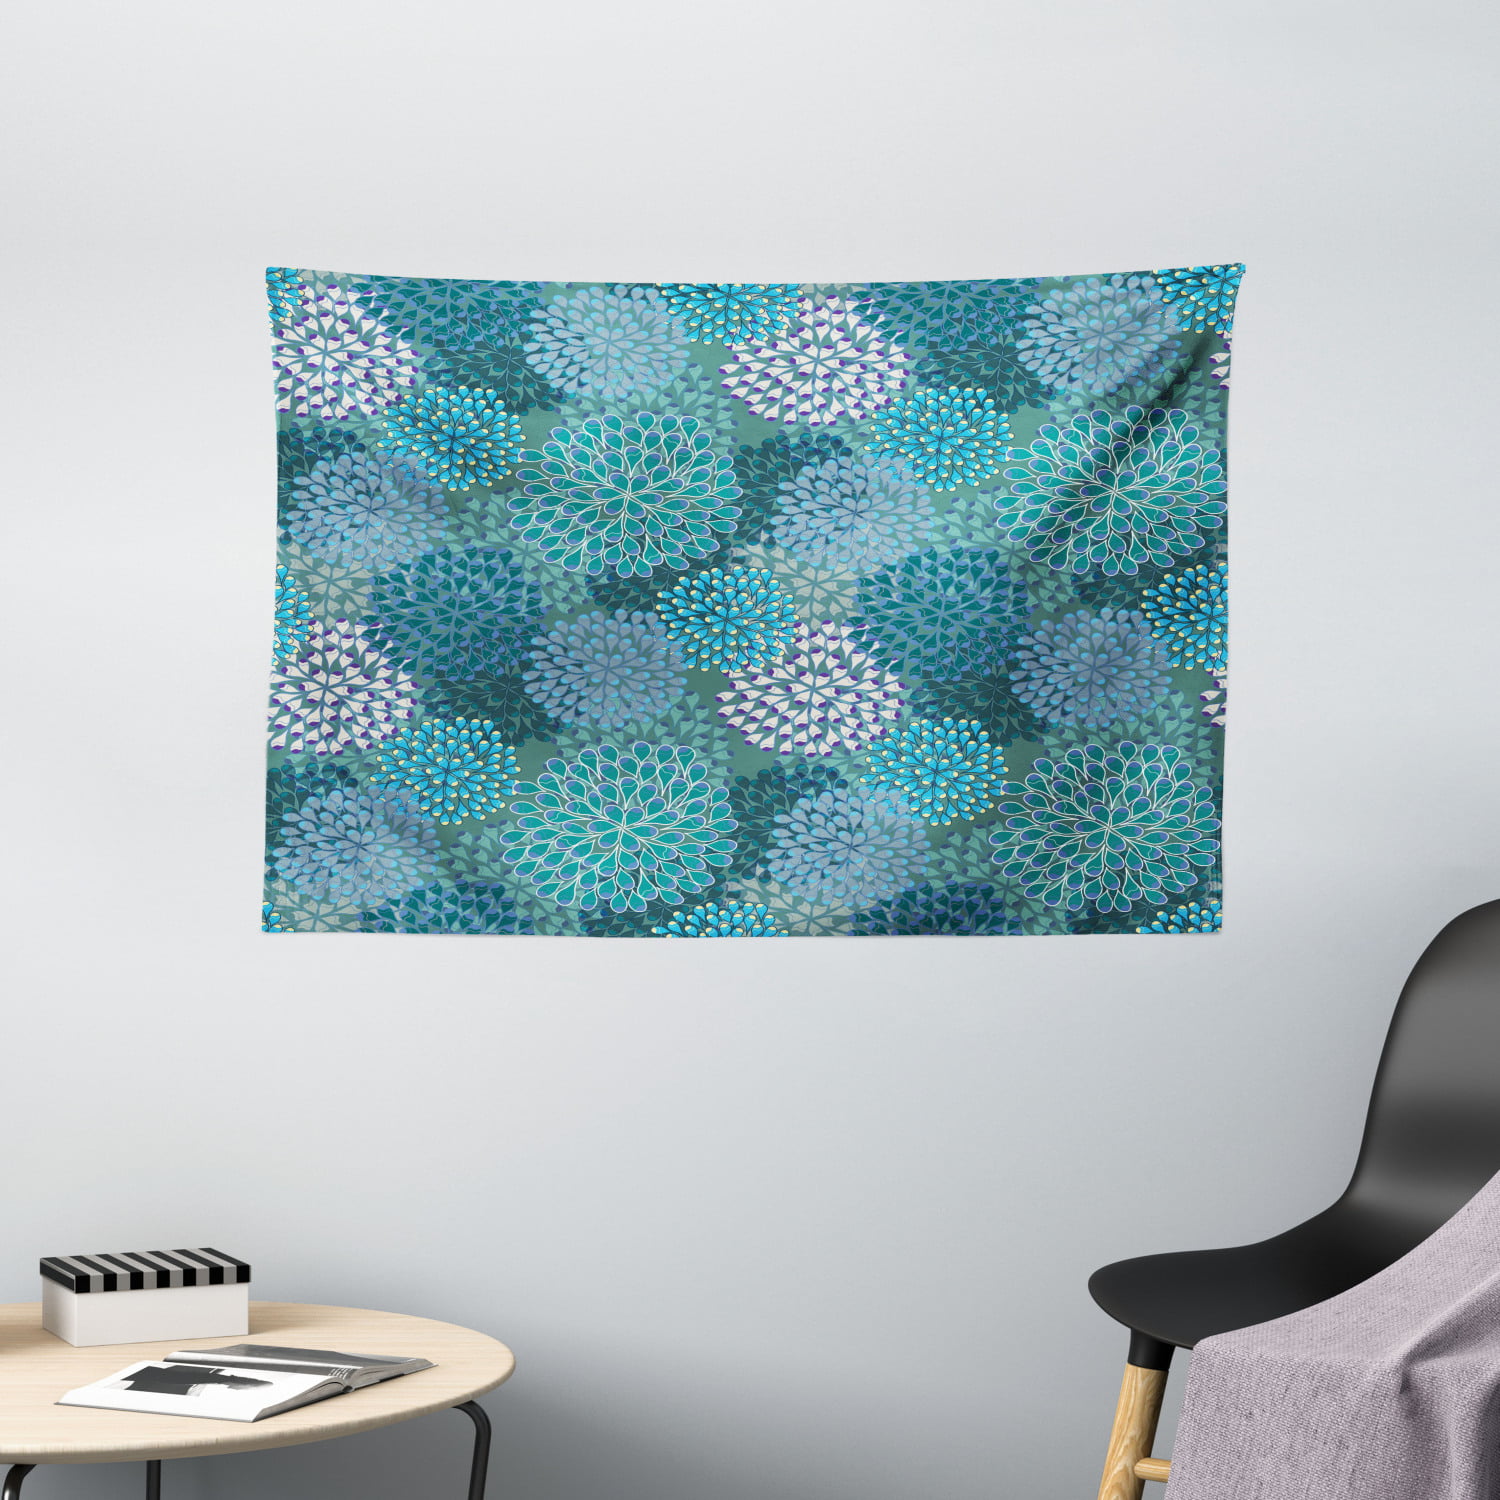 Floral Tapestry, Abstract Clove Petals Digital Featured Vibrant ...